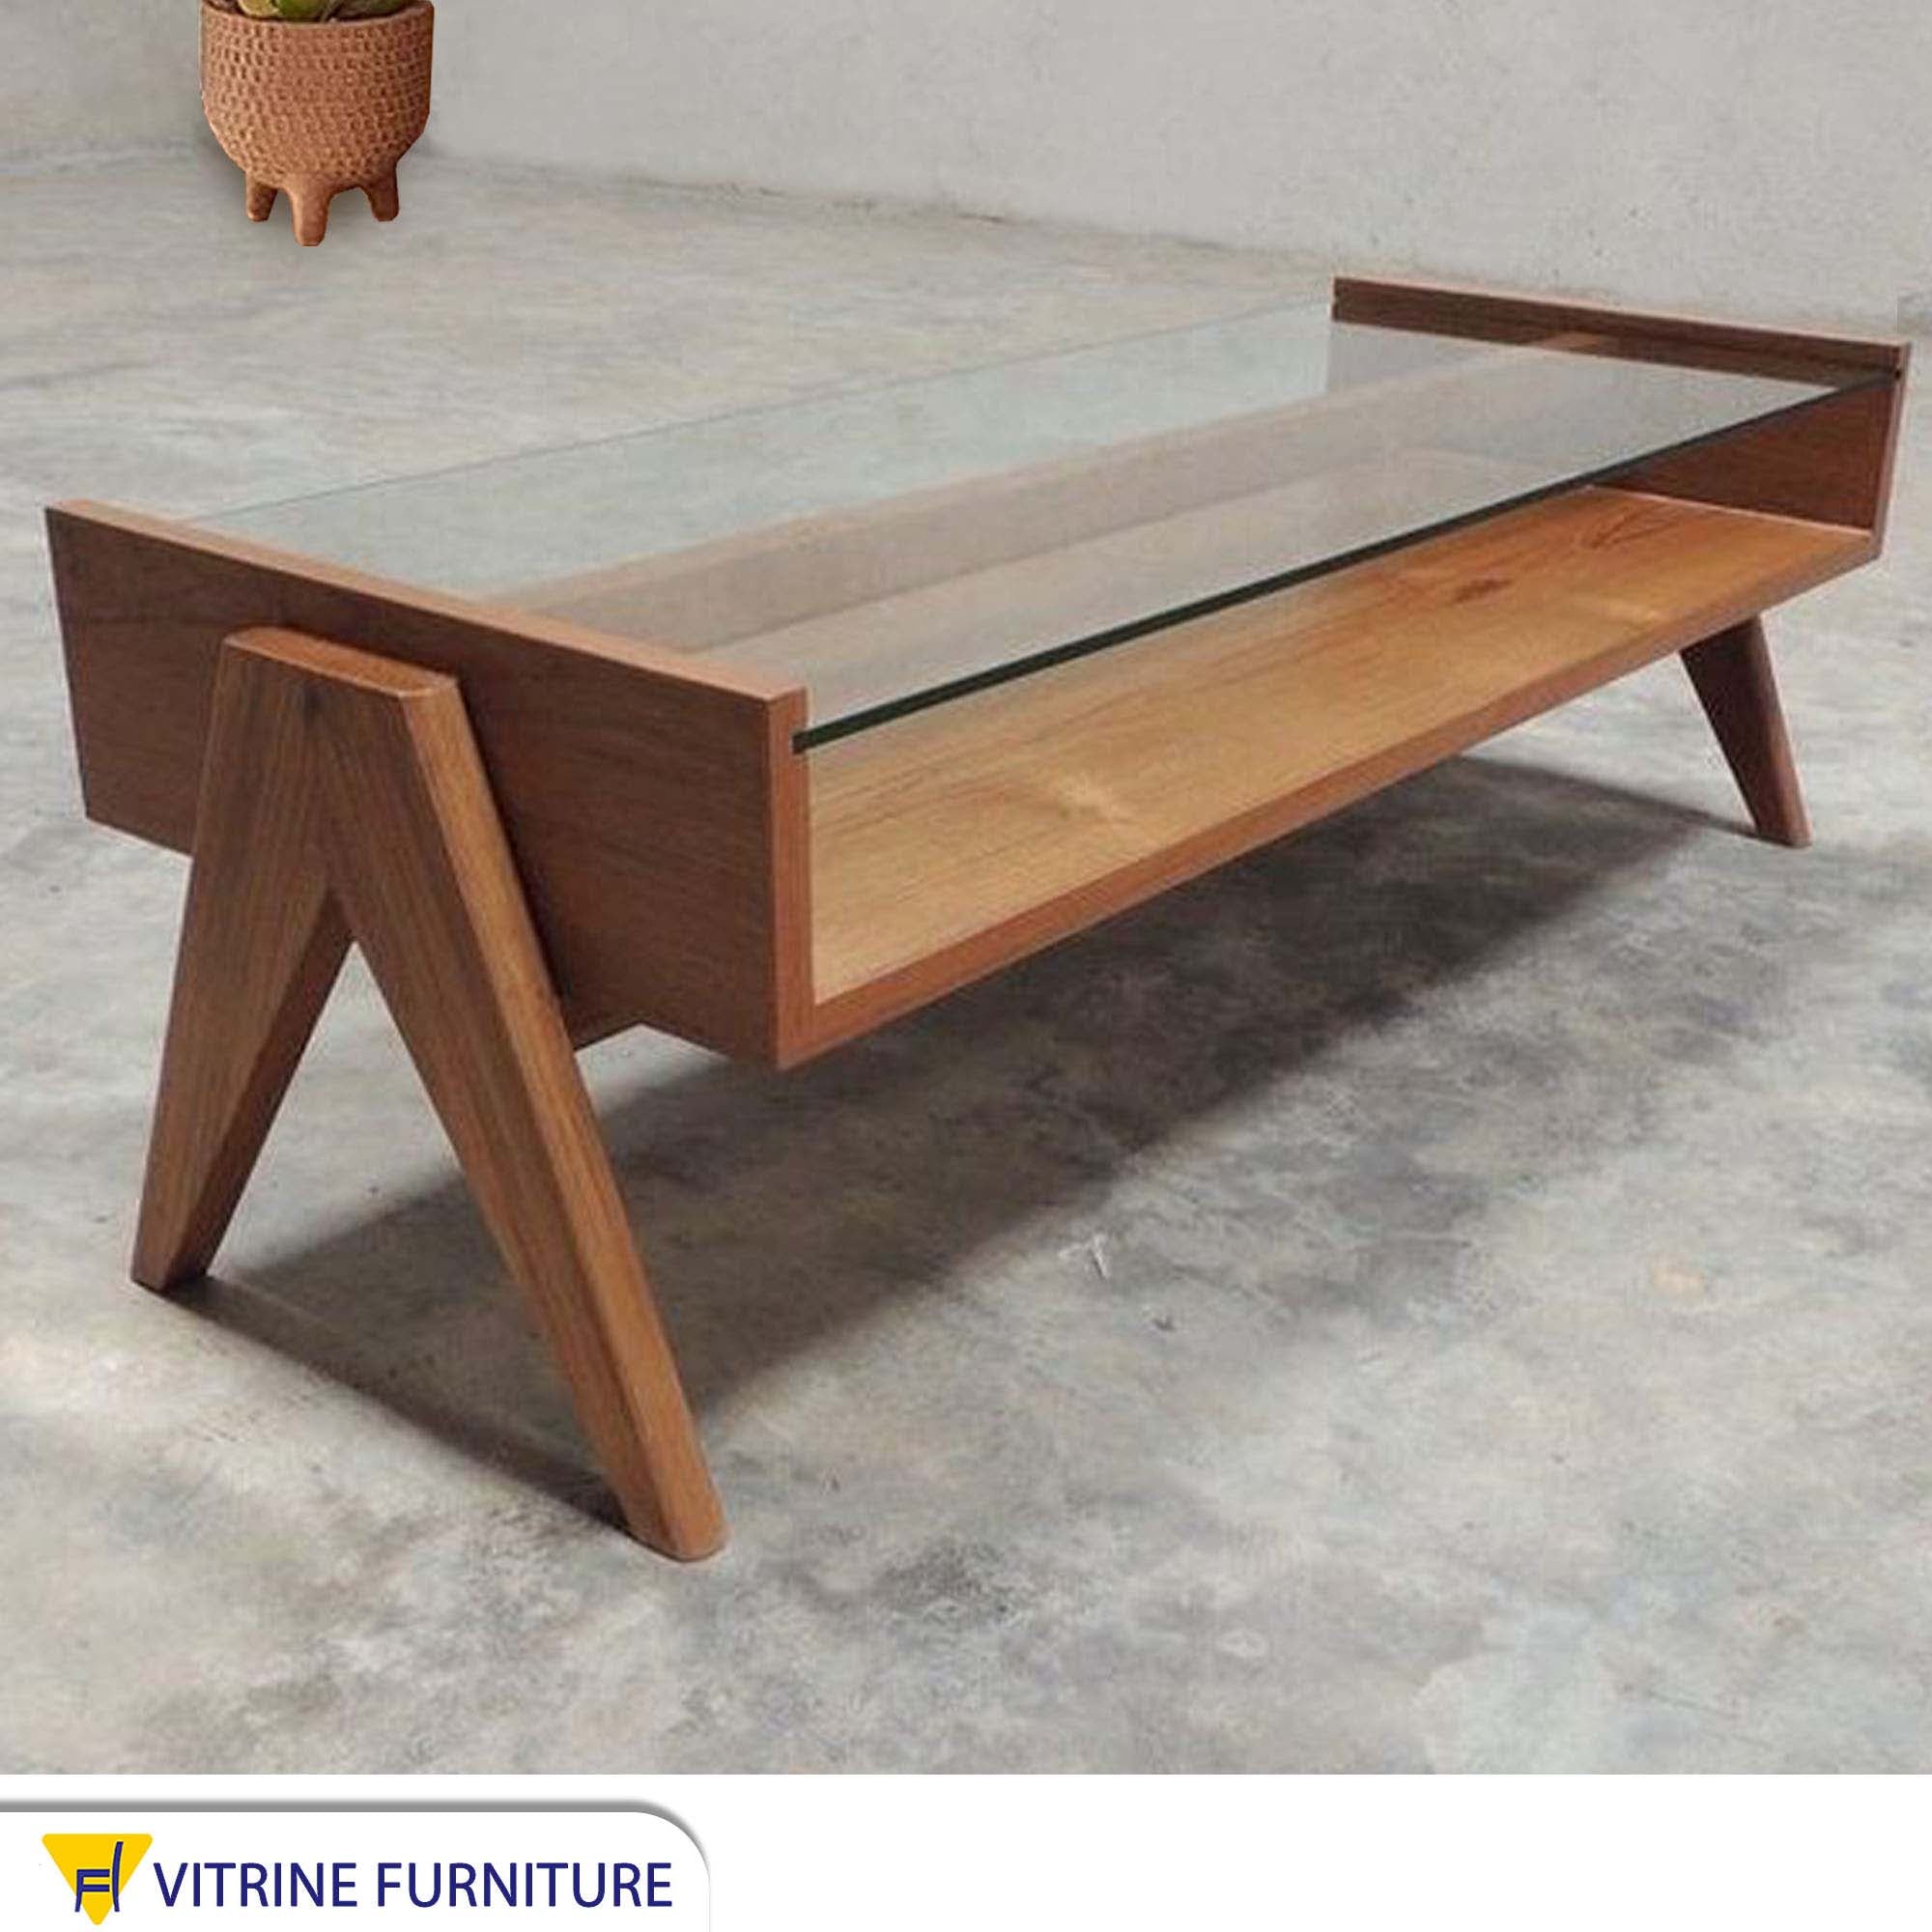 Rectangular table with glass top